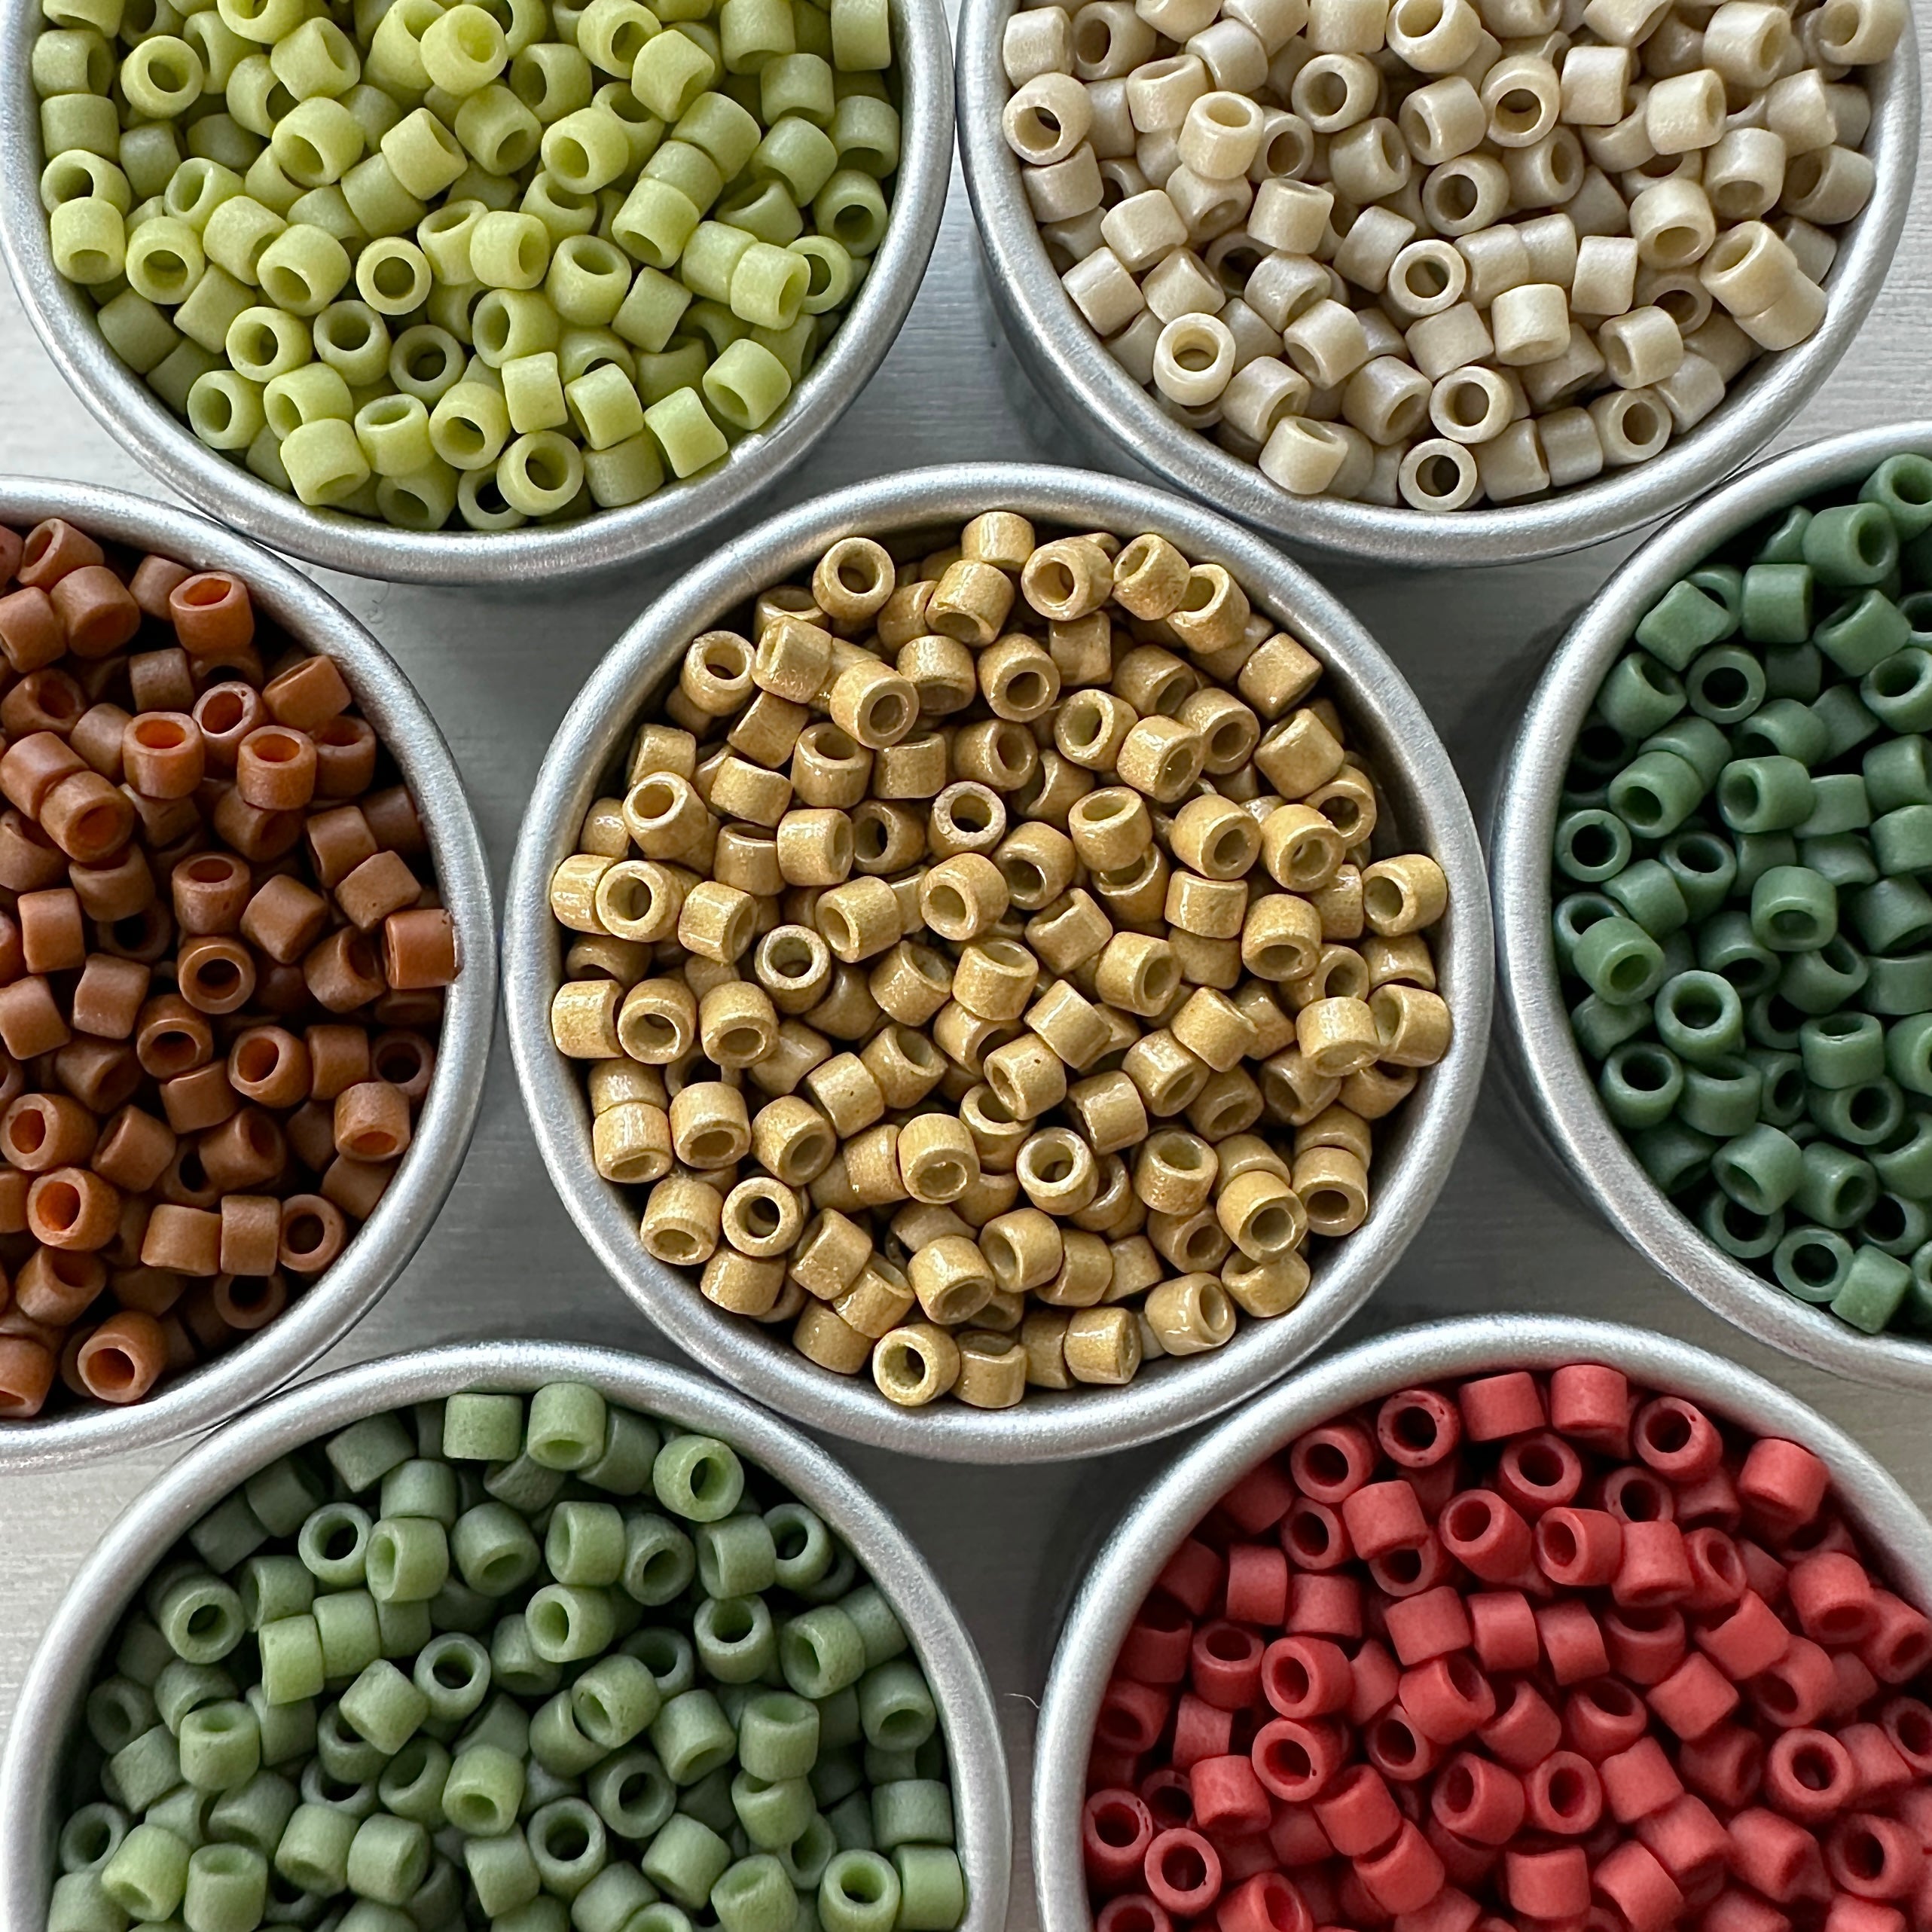 What Are The Different Types Of Delica Beads?